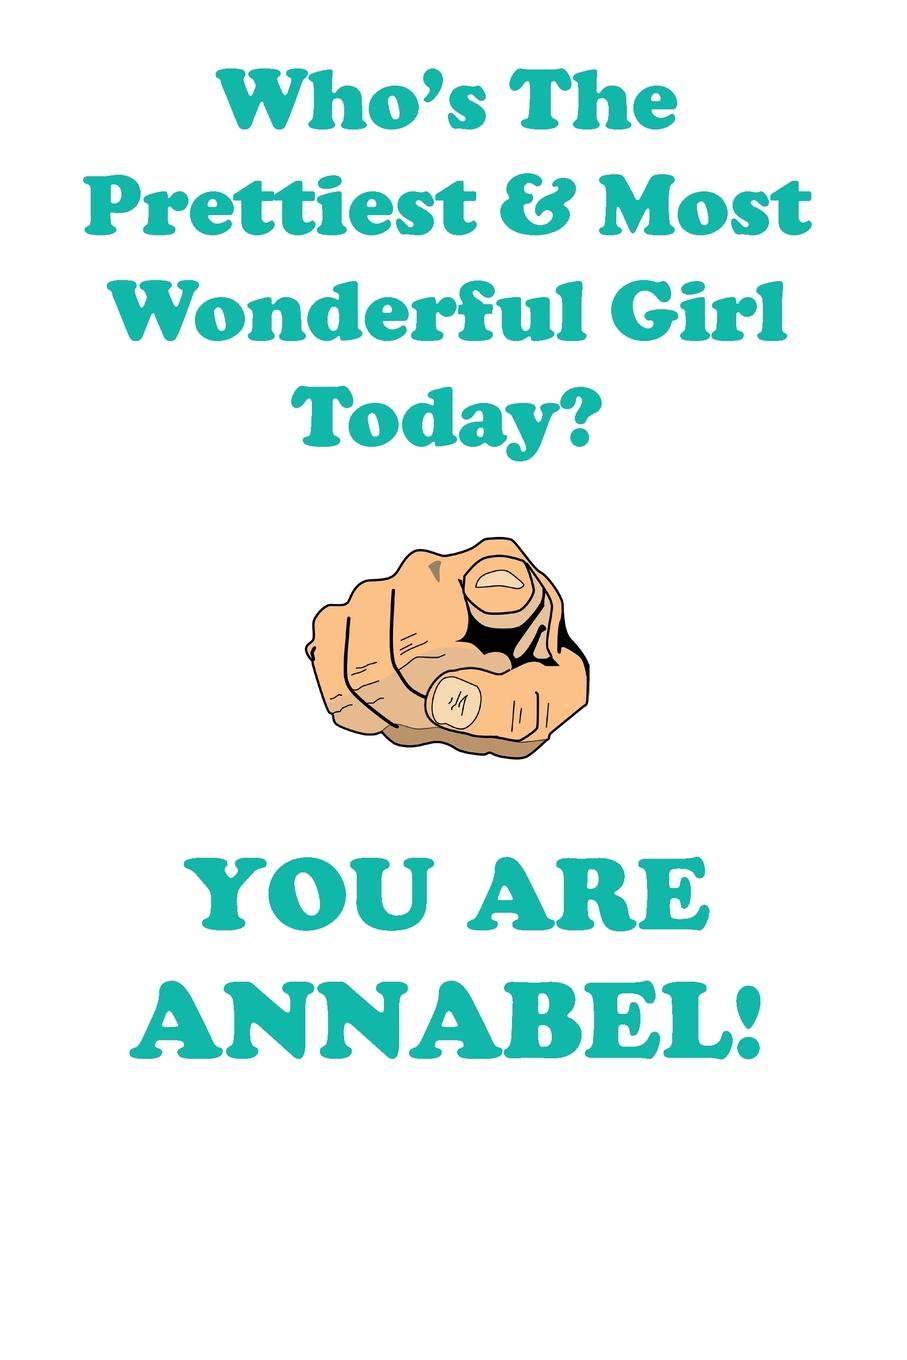 ANNABEL is The Prettiest Affirmations Workbook Positive Affirmations Workbook Includes. Mentoring Questions, Guidance, Supporting You